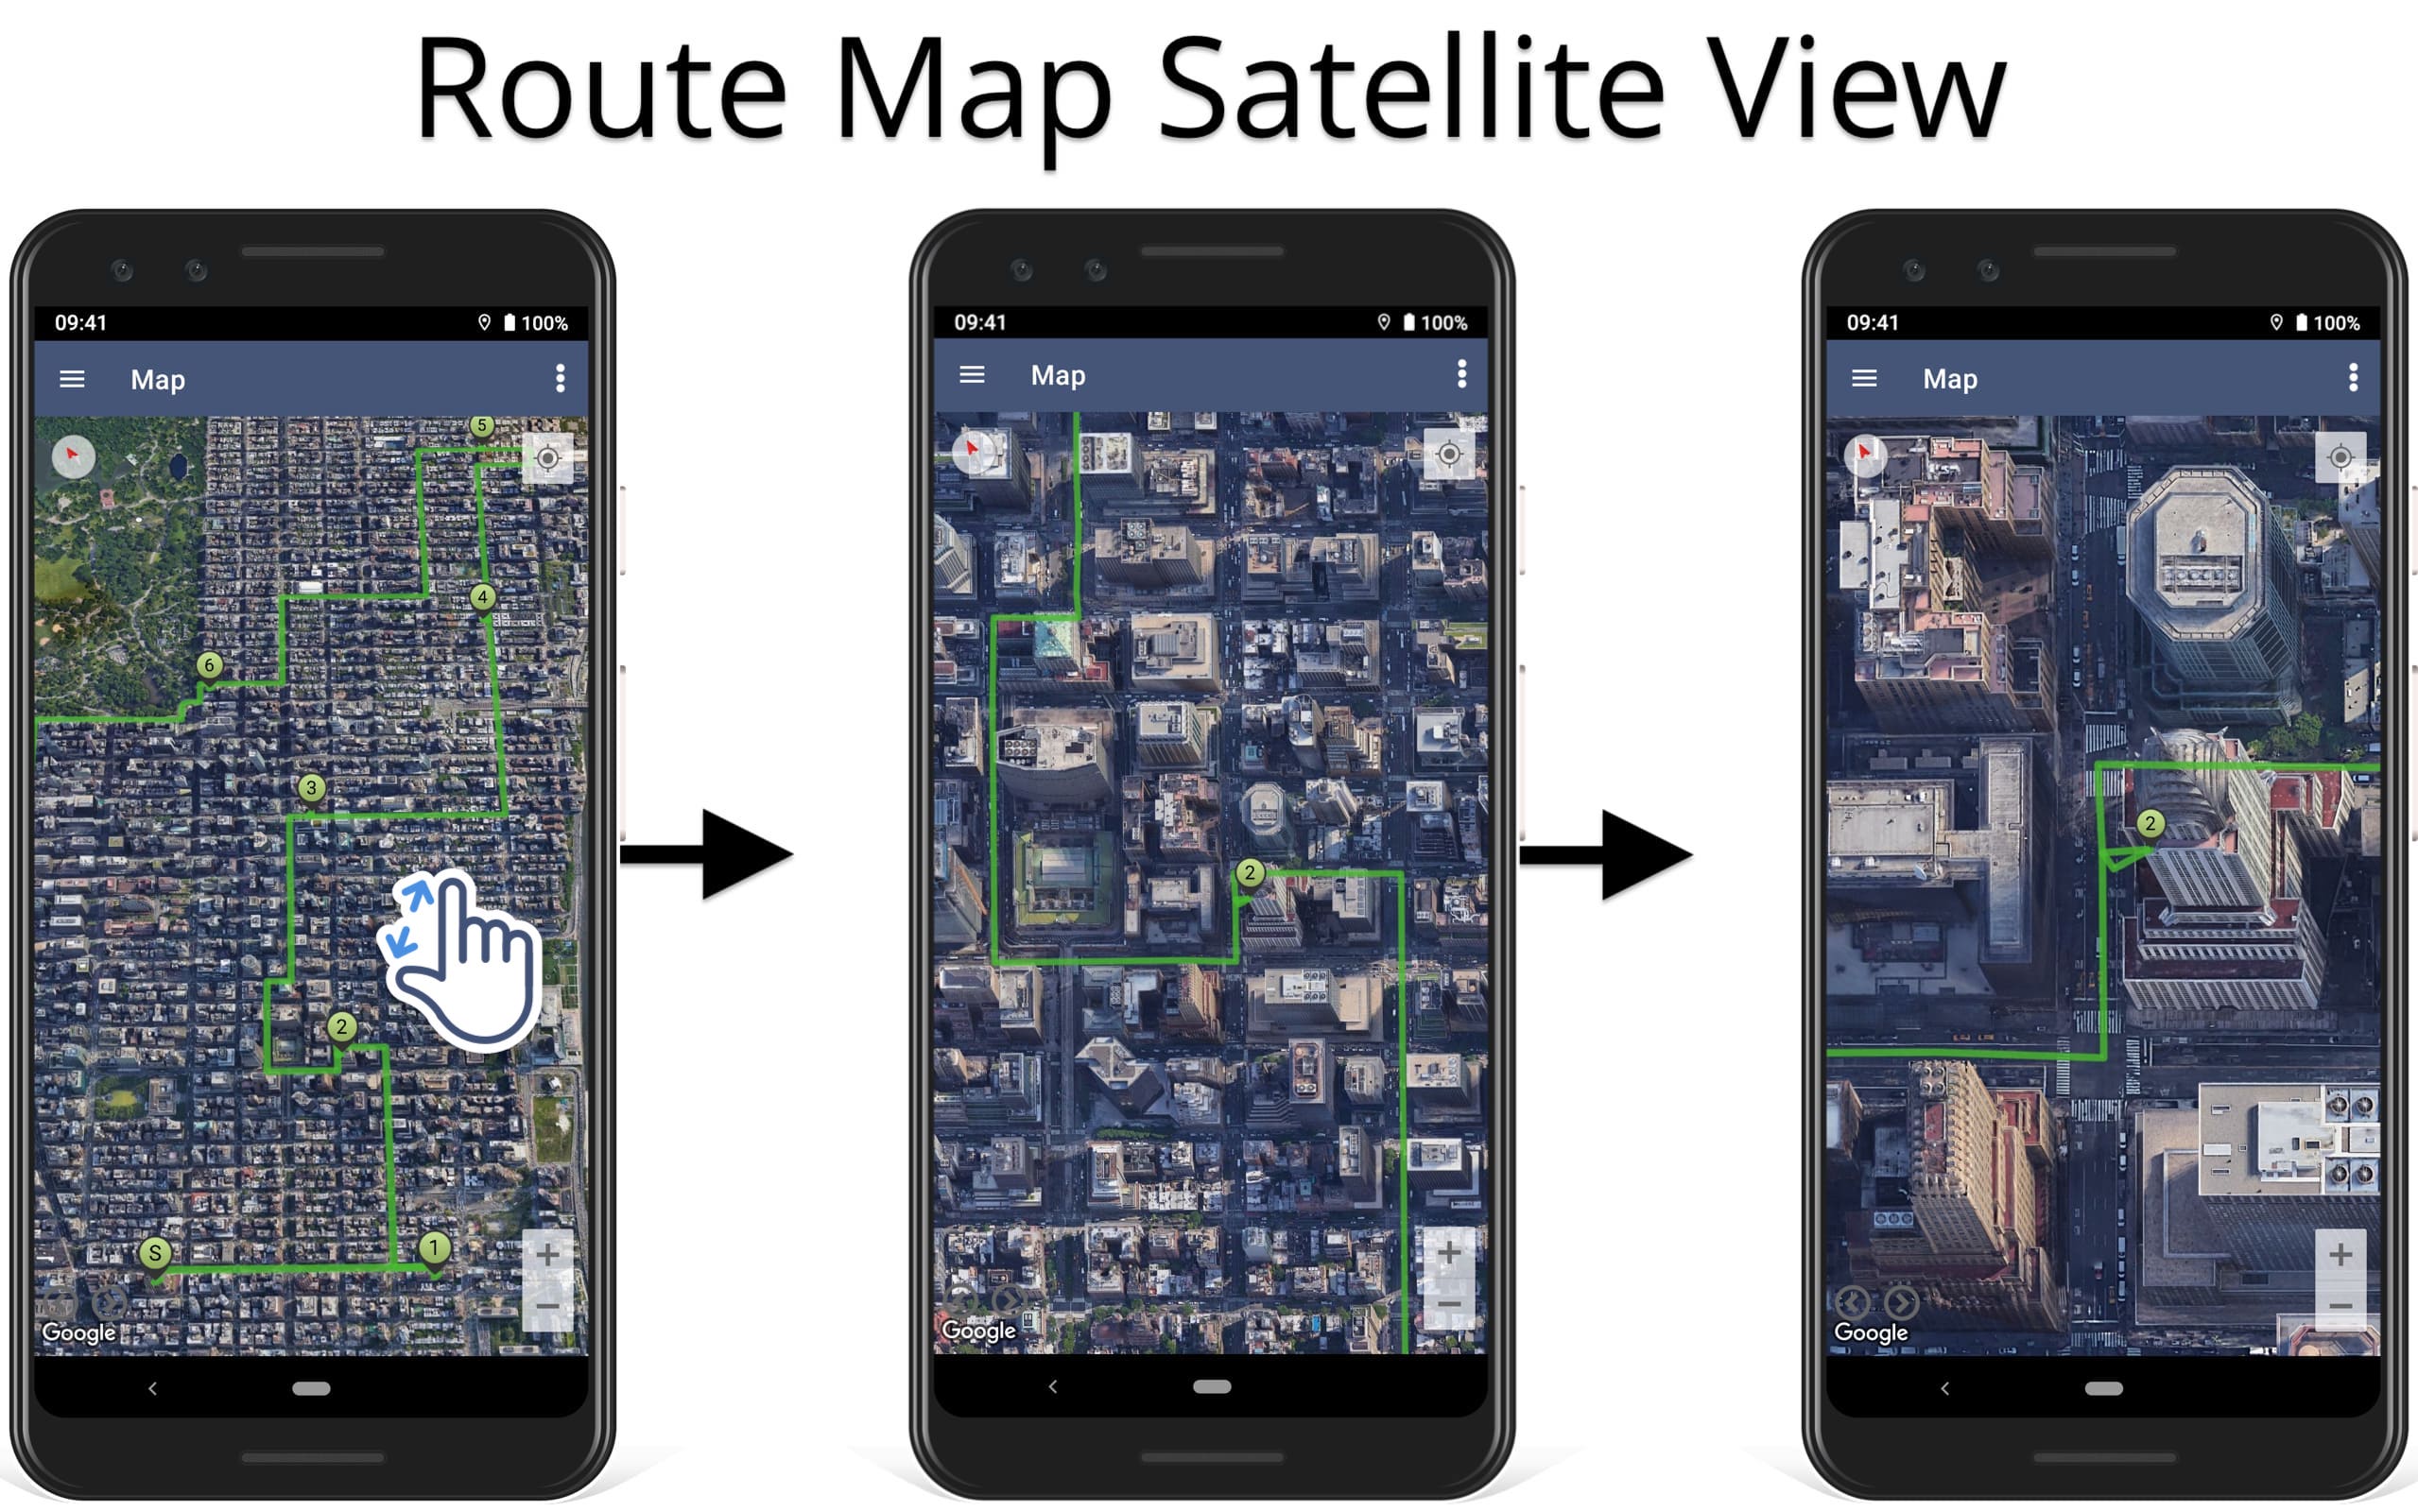 View planned routes with the satellite map view on Route4Me's Android Route Planner app.